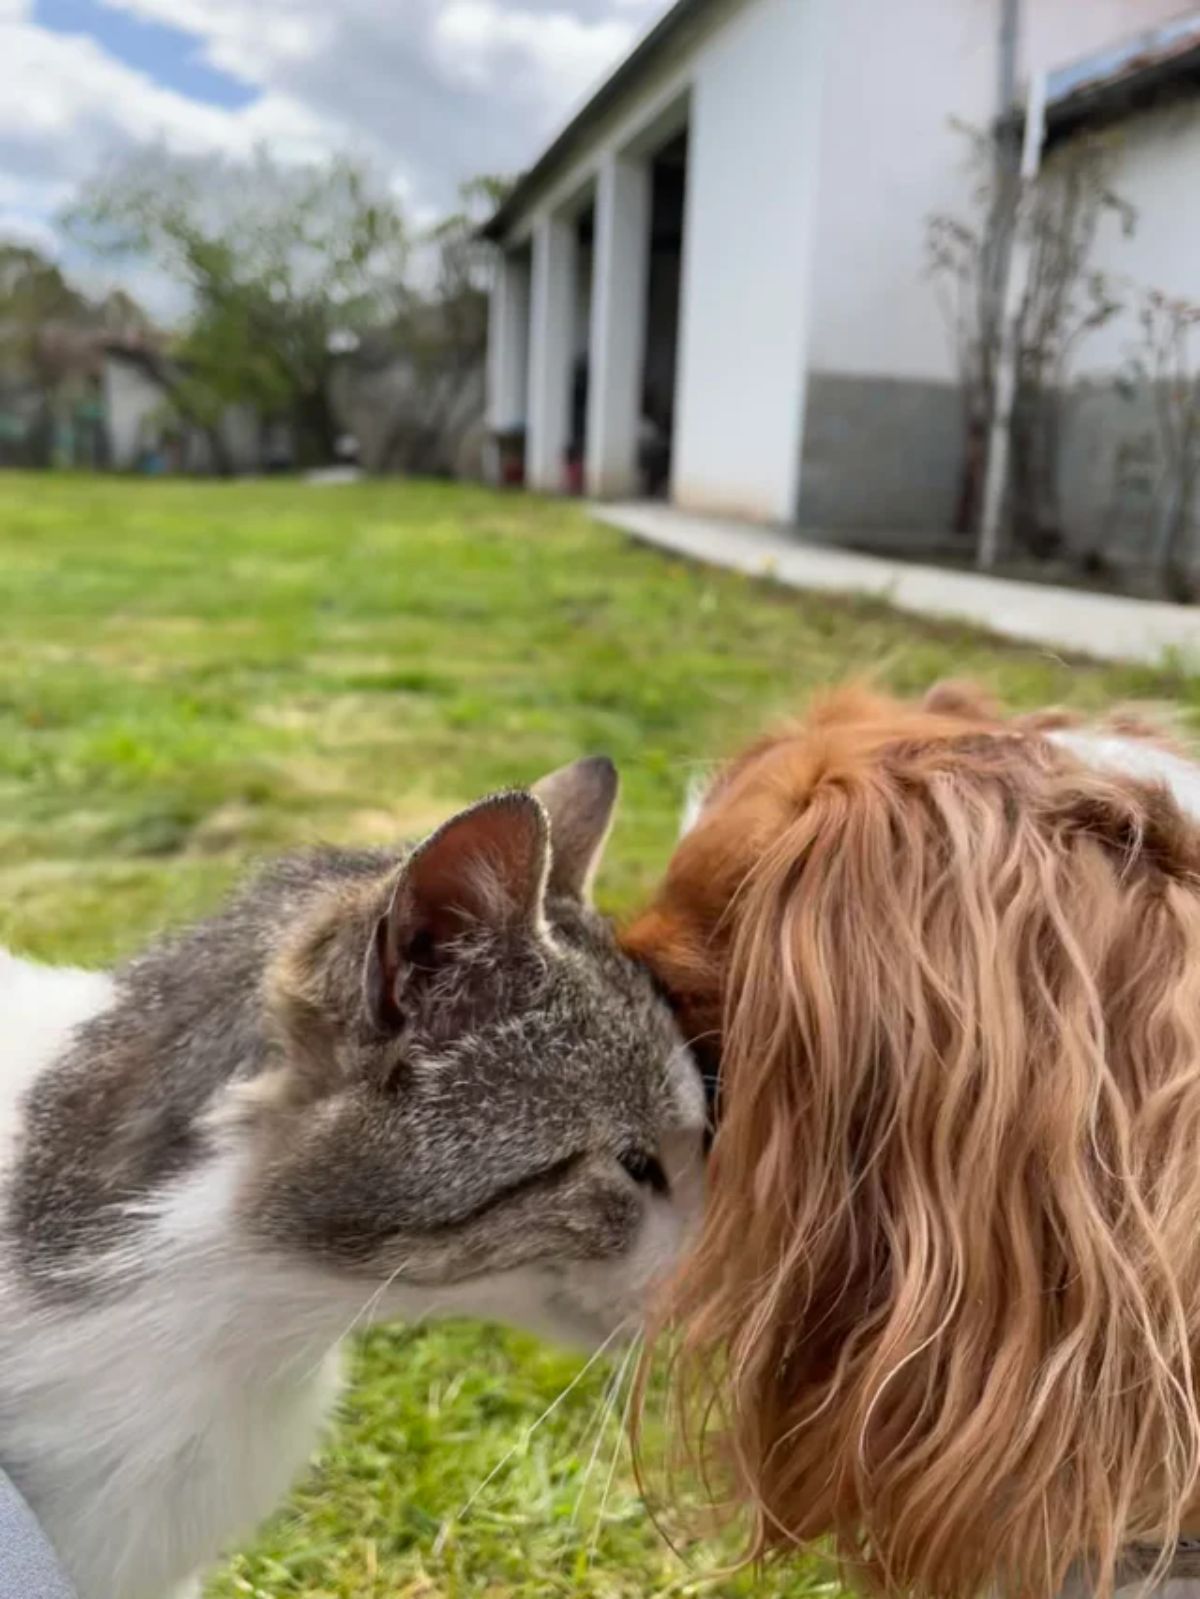 grey and white cat nuzzling a fluffy brown and white dog